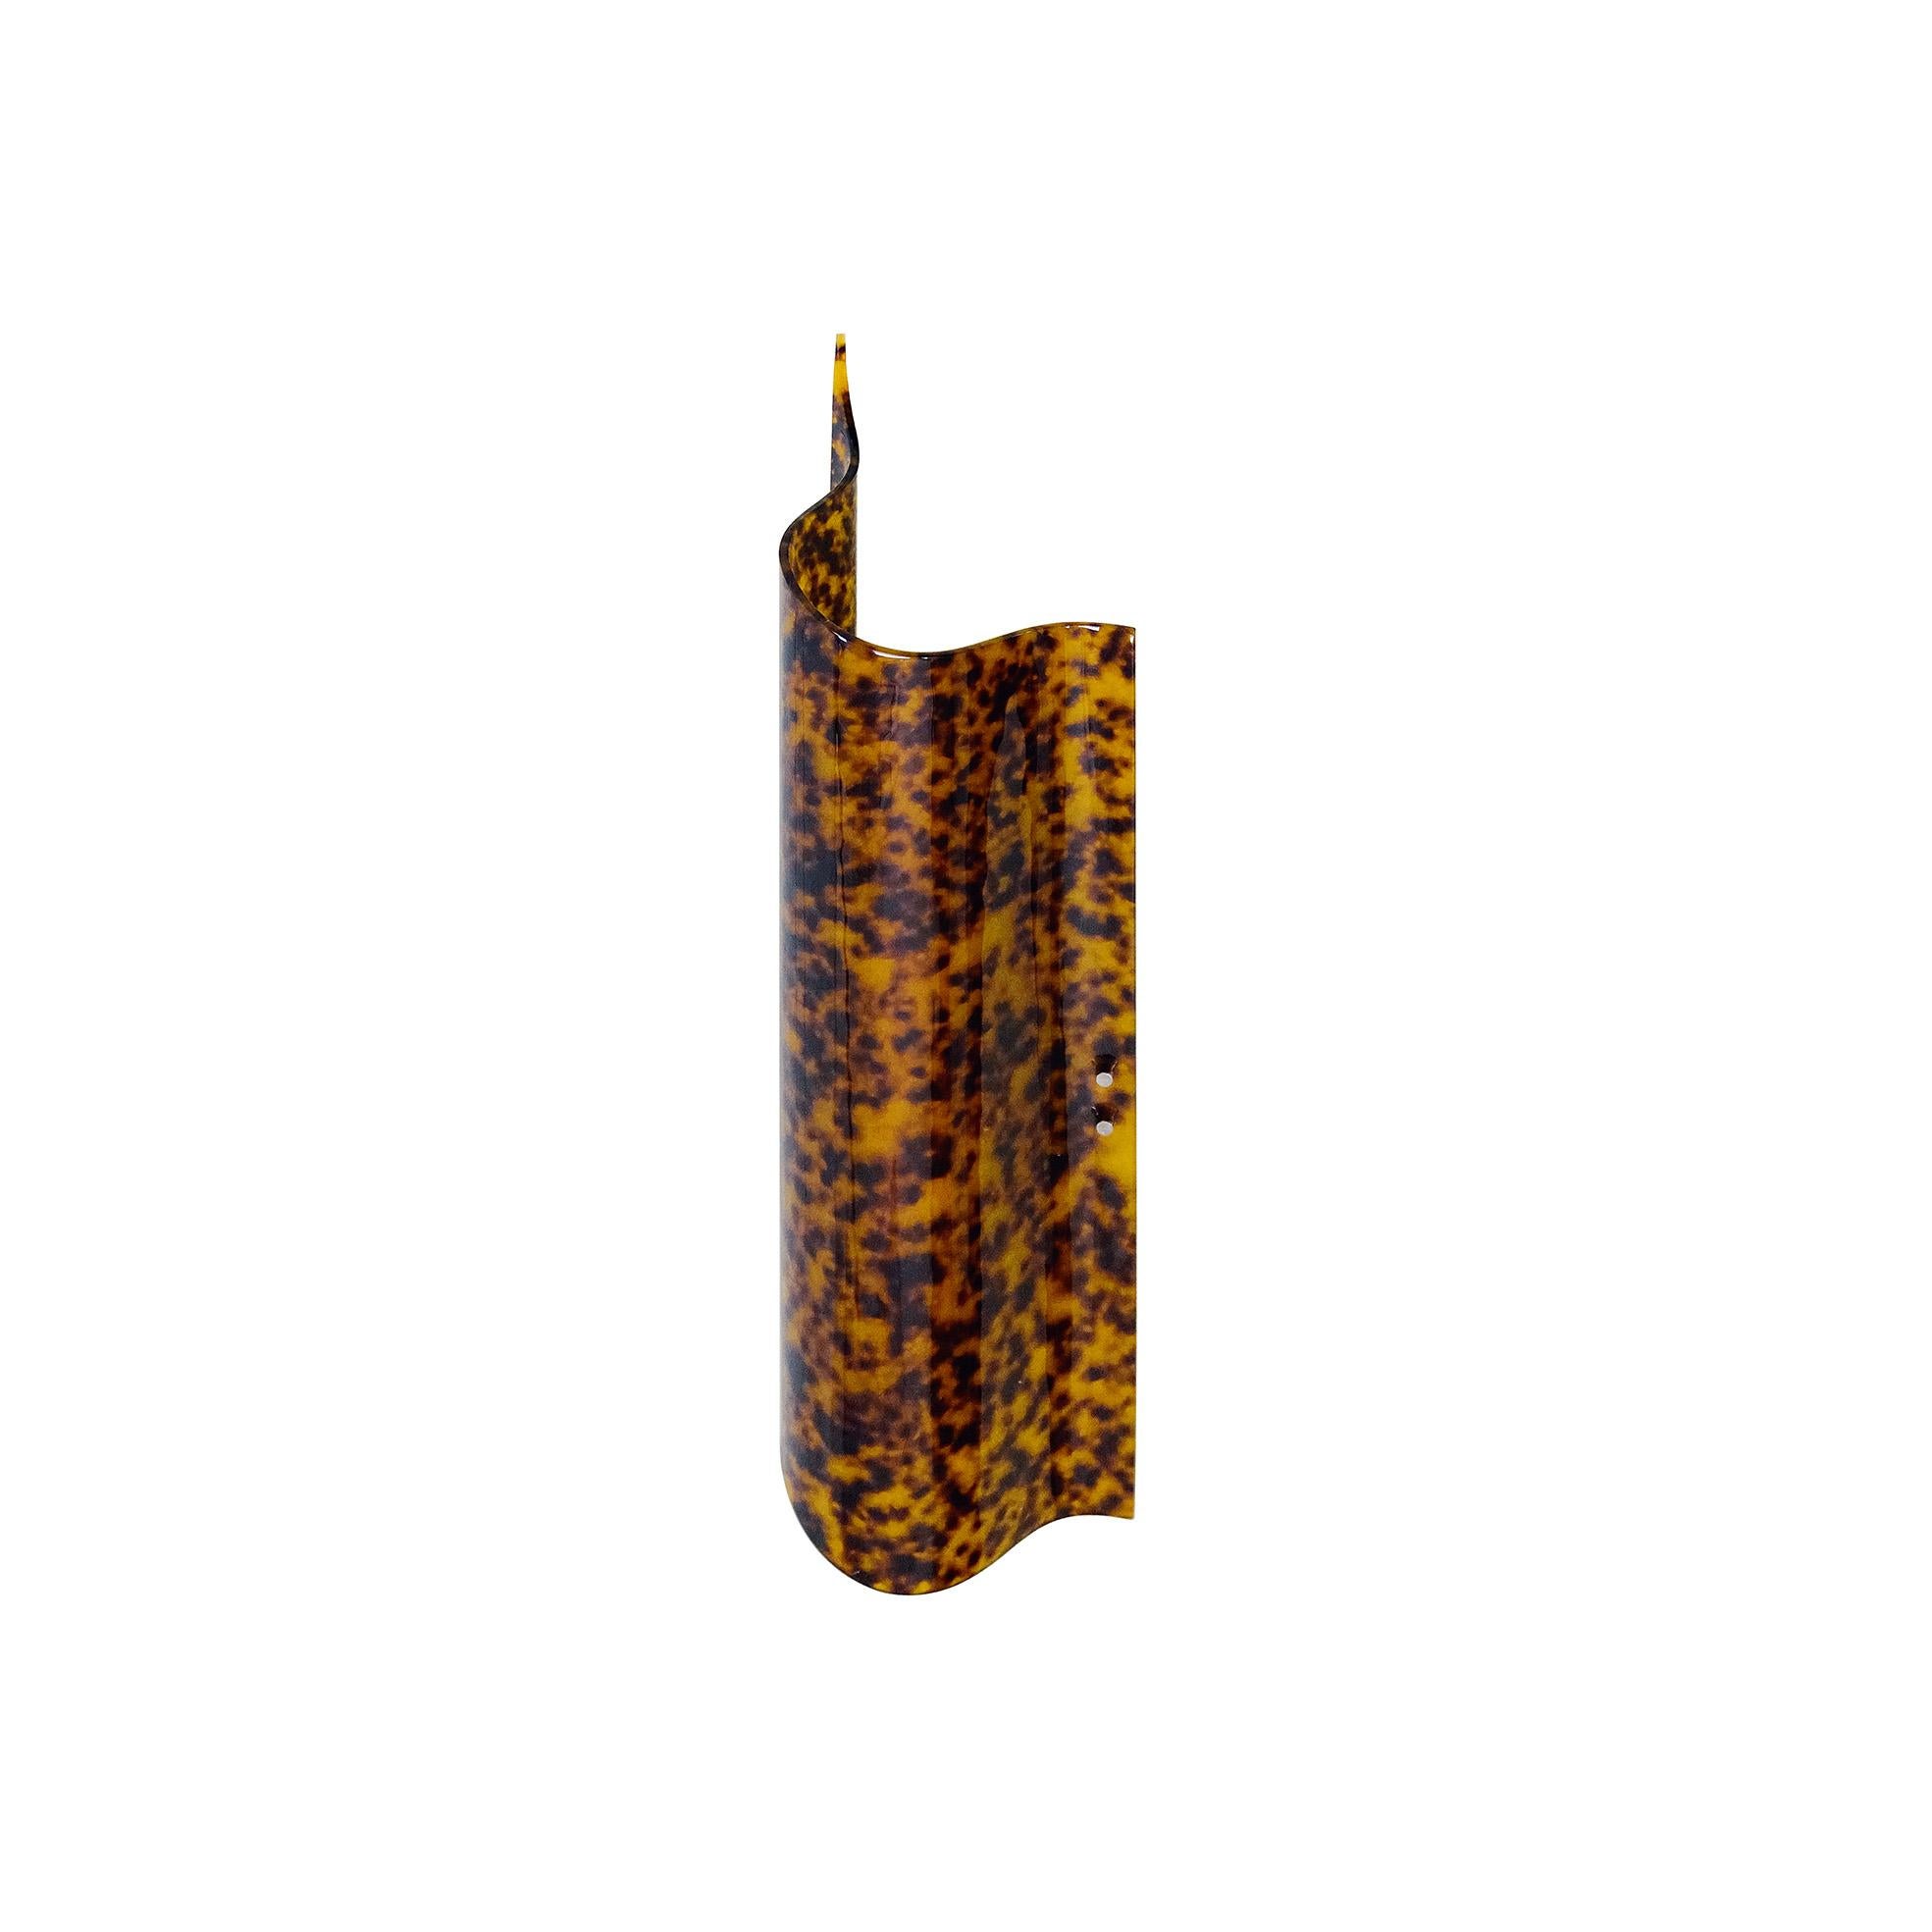 Contemporary Italian Modern Wall Lamp 'VOODOO' in Tortoise Shell Effect  For Sale